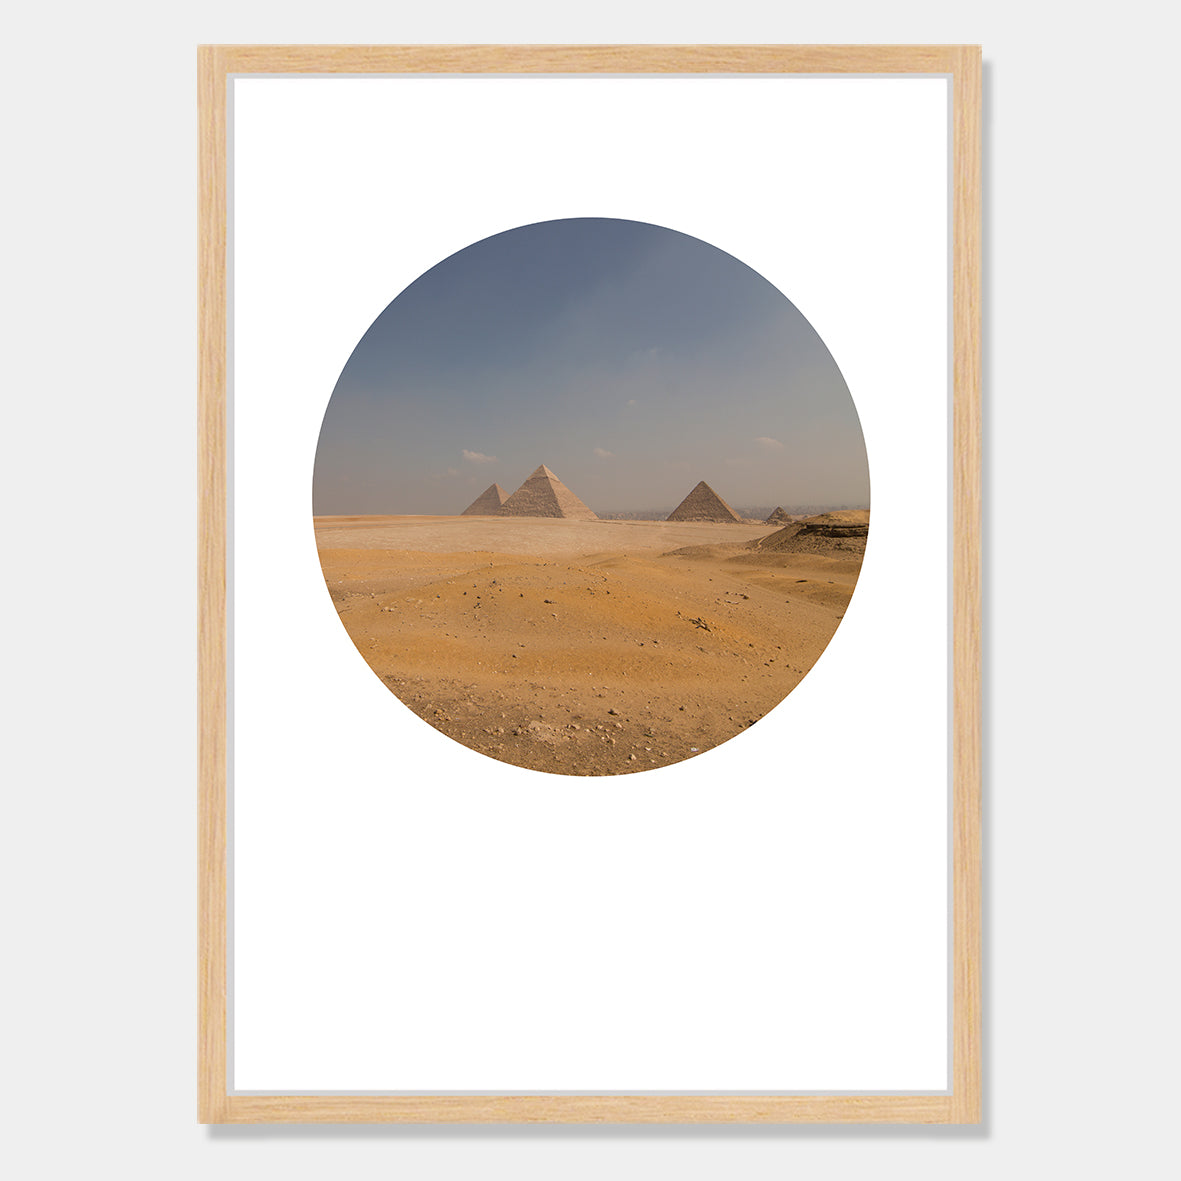 Photographic art print of the Great Pyramids, Egypt by Chris Starkey. Printed in New Zealand by endemicworld and framed in raw oak.